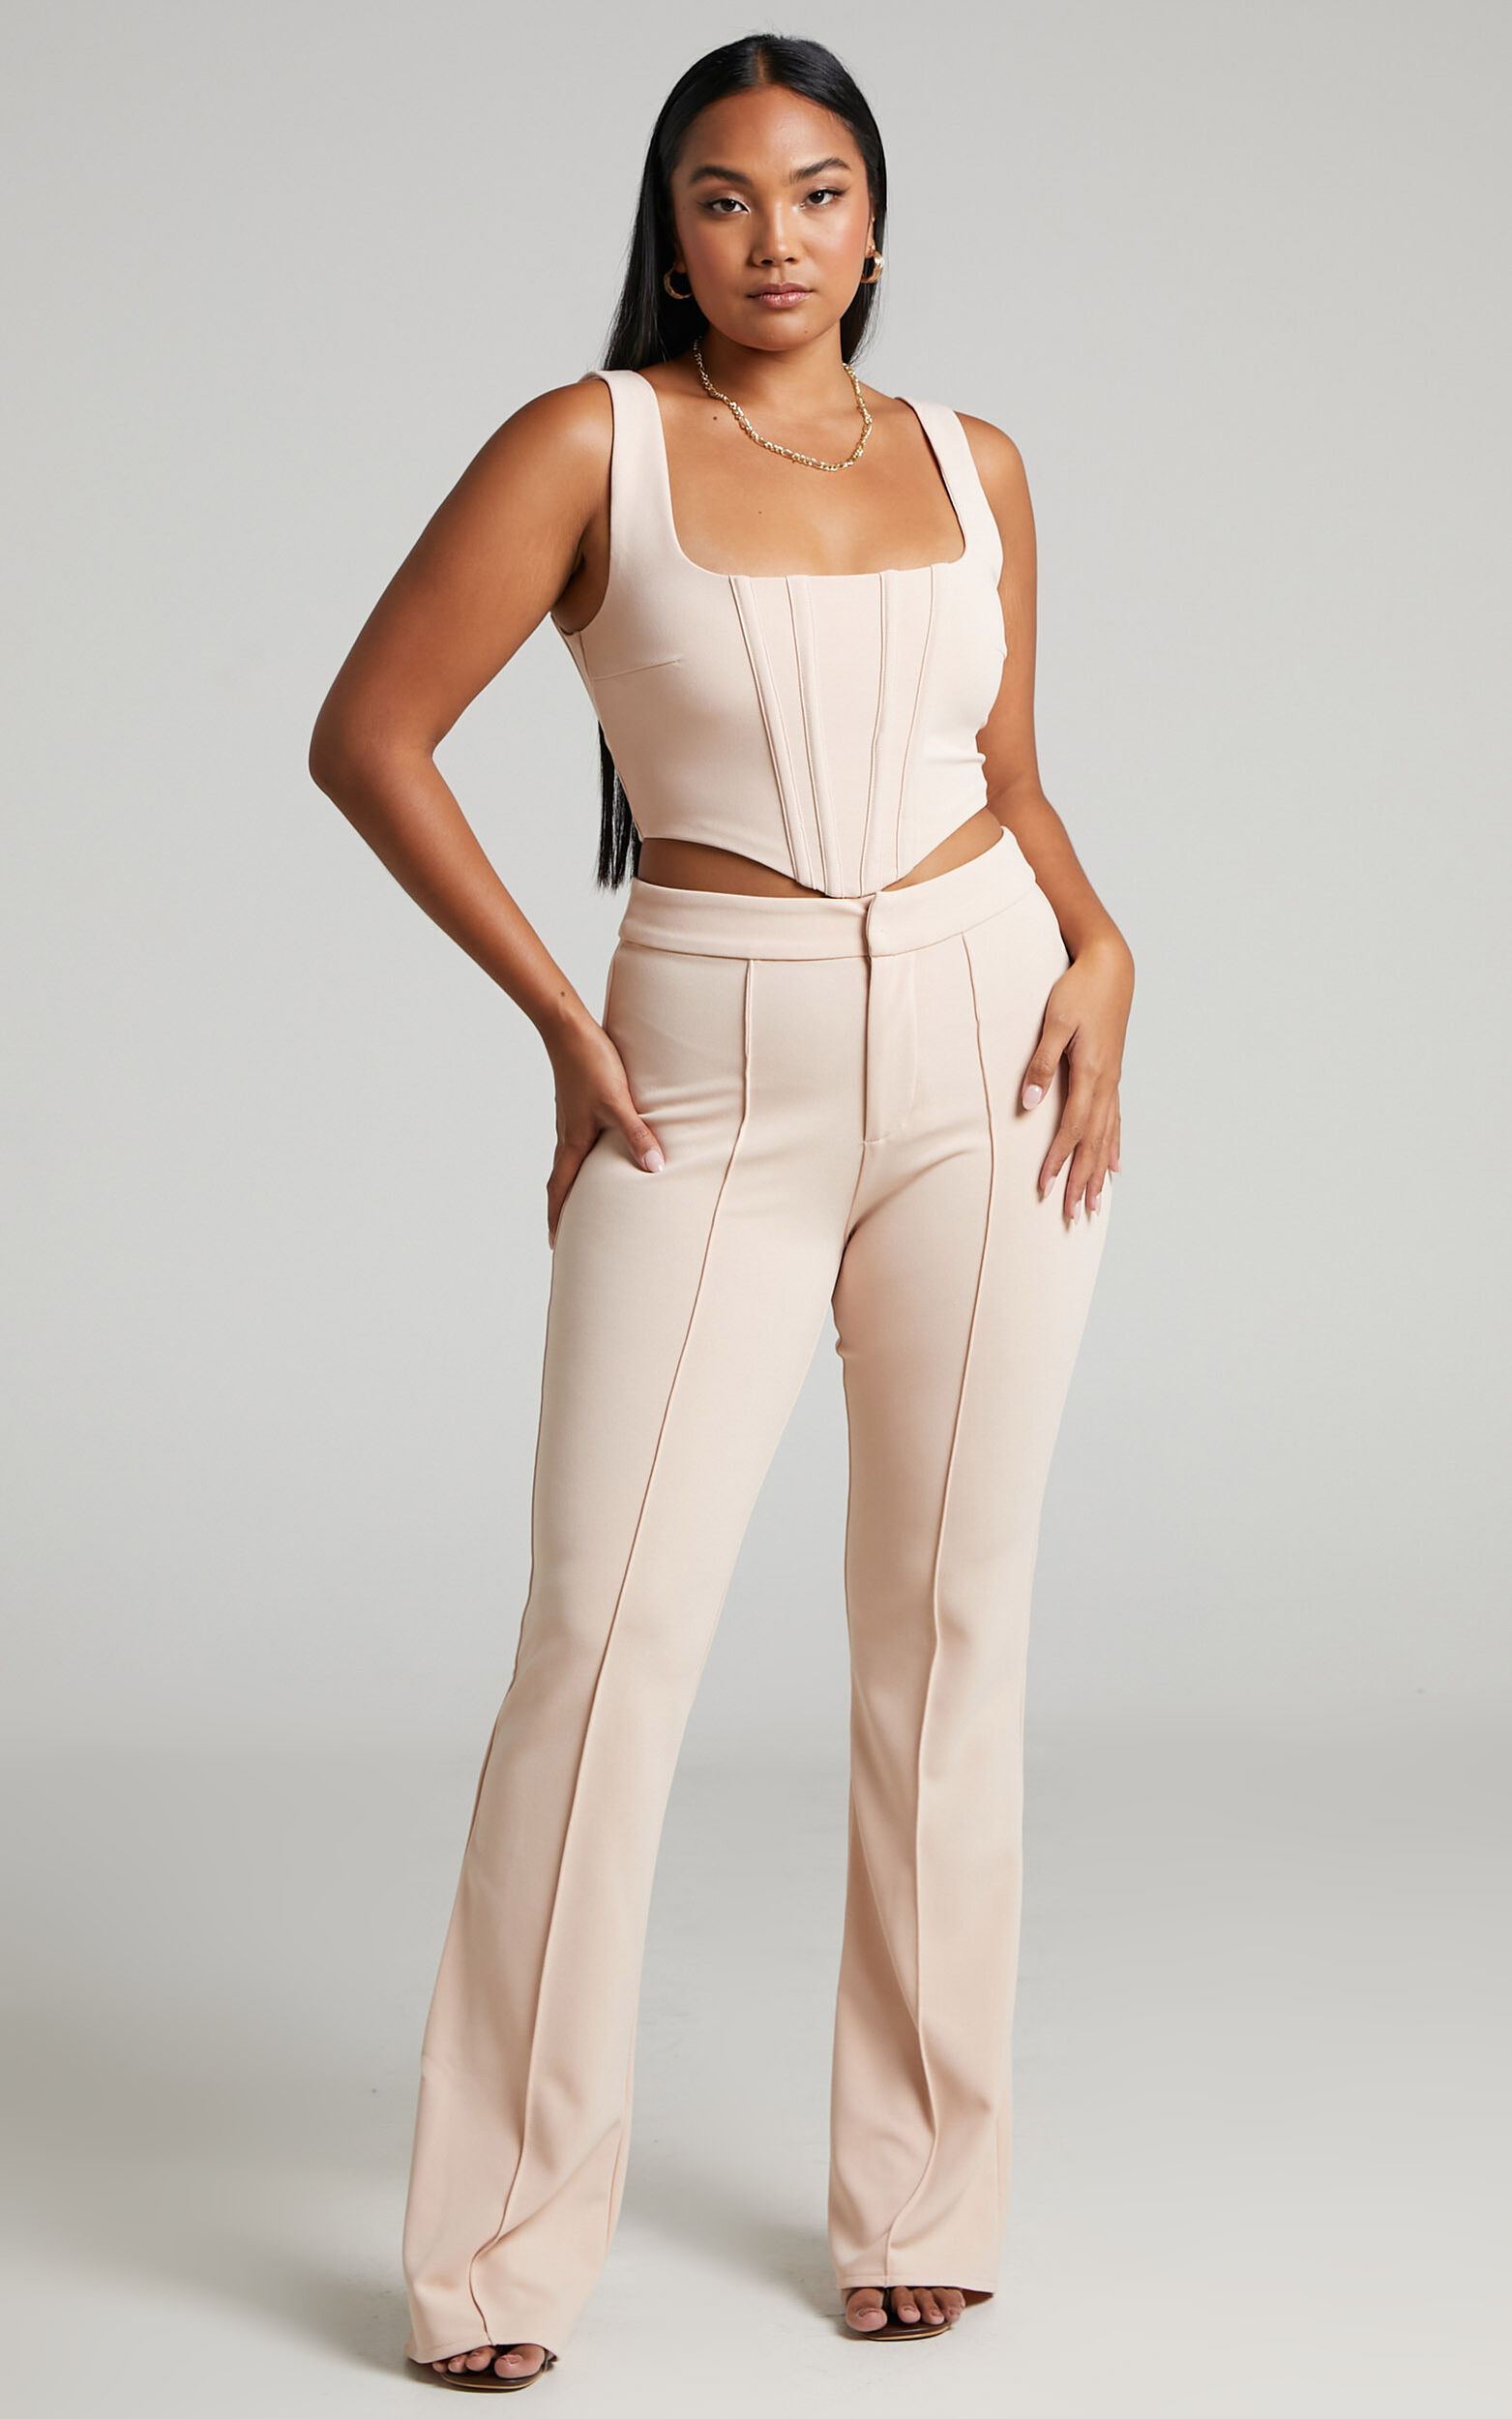 https://images.showpo.com/dw/image/v2/BDPQ_PRD/on/demandware.static/-/Sites-sp-master-catalog/default/dw1f4227e8/images/ritta-two-piece-pant-set-with-corset-top-SC21080017/3_-_Ritta_Two_Piece_Pant_Set_with_Corset_Top_in_Cream_2528SC21080017022529_2.jpg?sw=1563&sh=2500